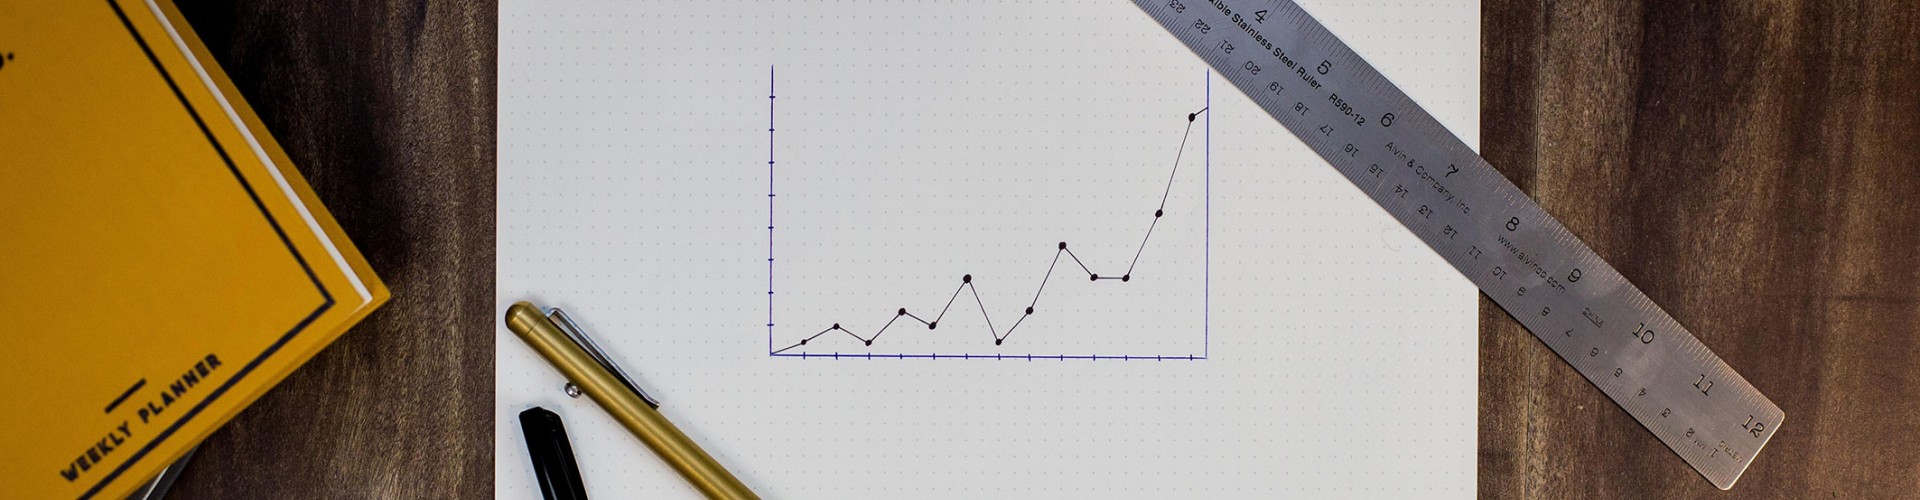 neatly drawn graph with ruler and pens